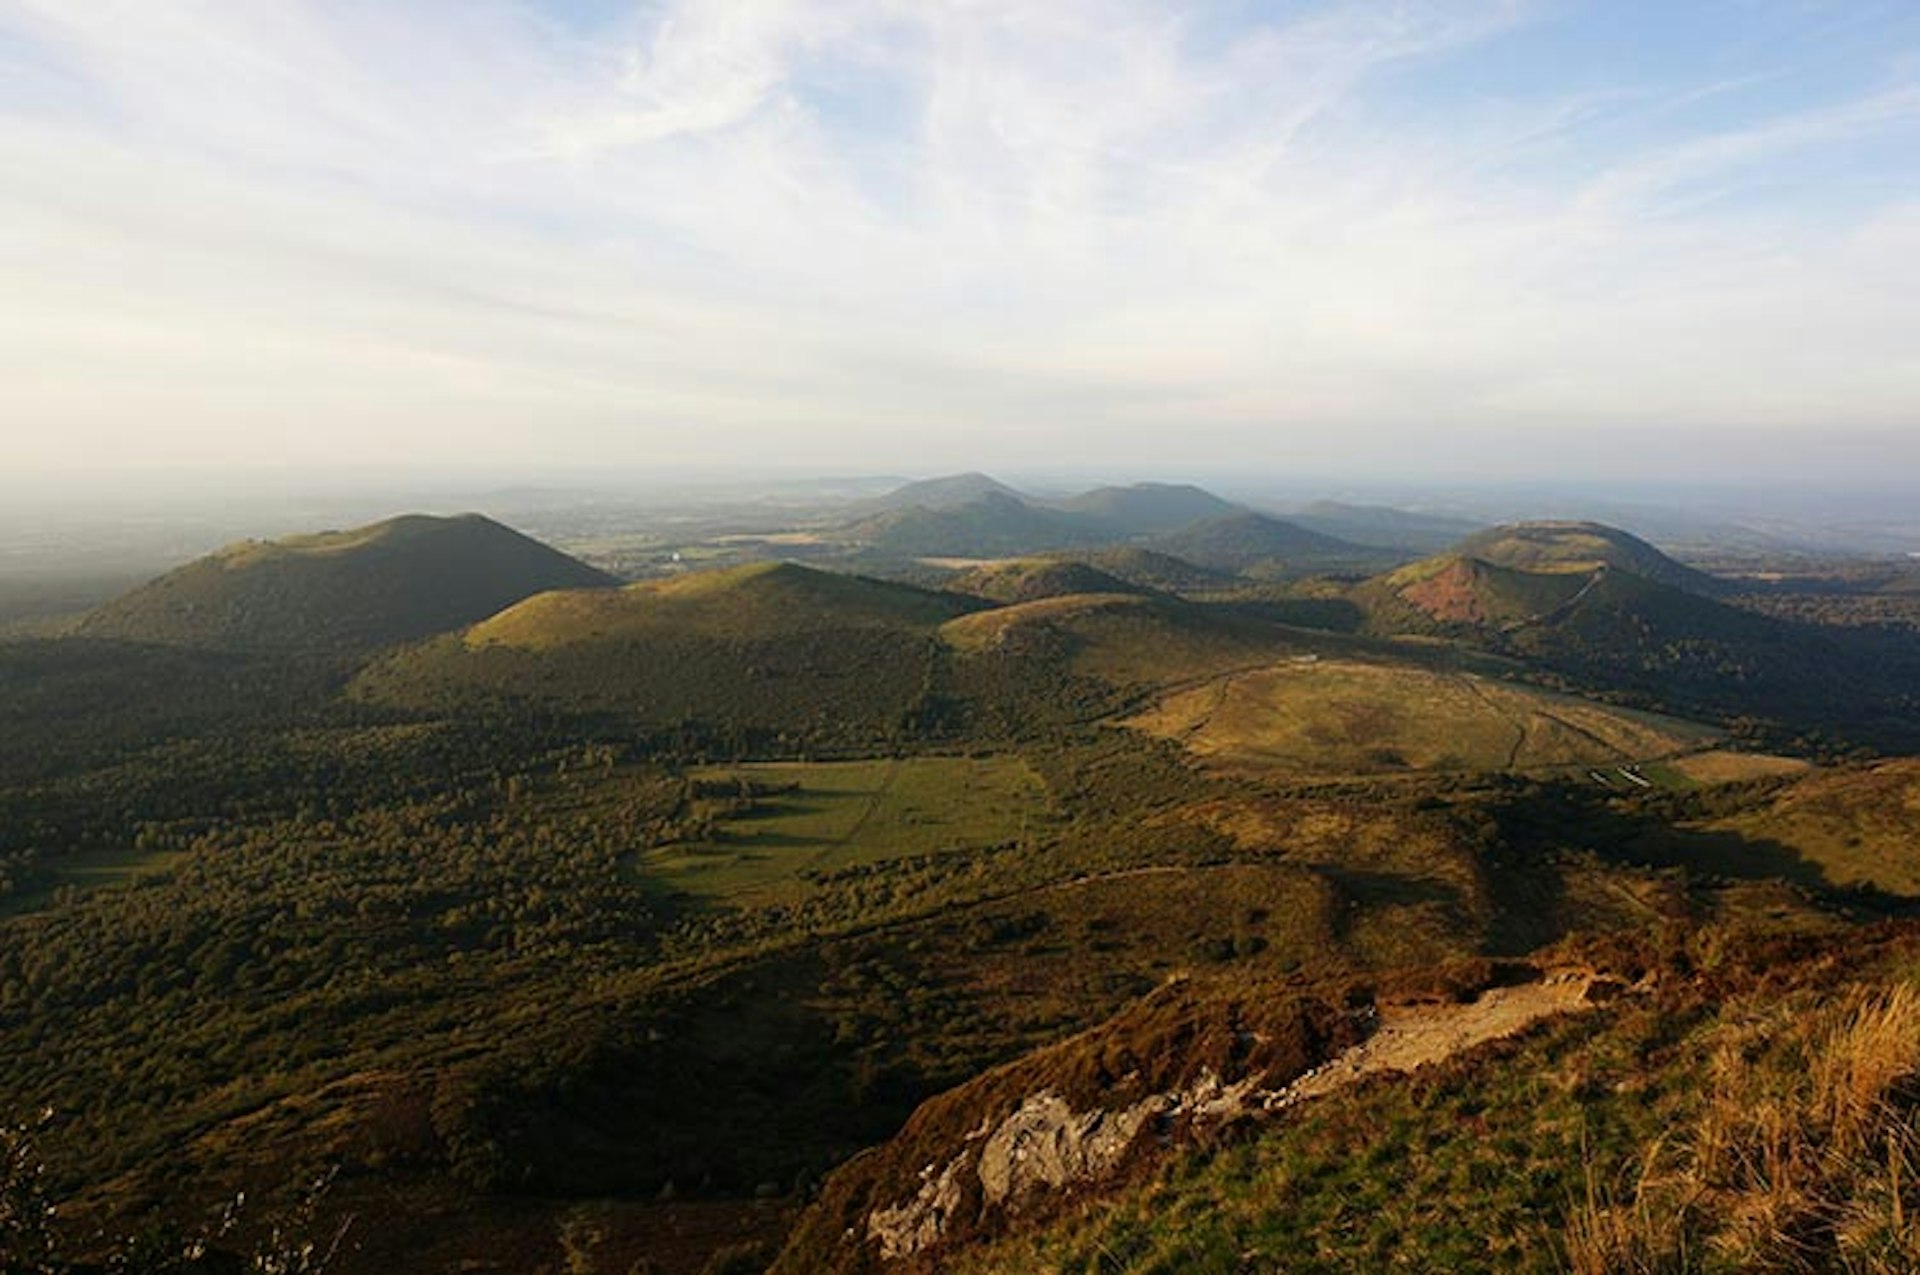 The dormant Chaîne des Puys volcanoes, seen here from the top of the Panoramique des Dômes, lend the Auvergne's scenery a dramatic quality. Image by Anita Isalska / Lonely Planet